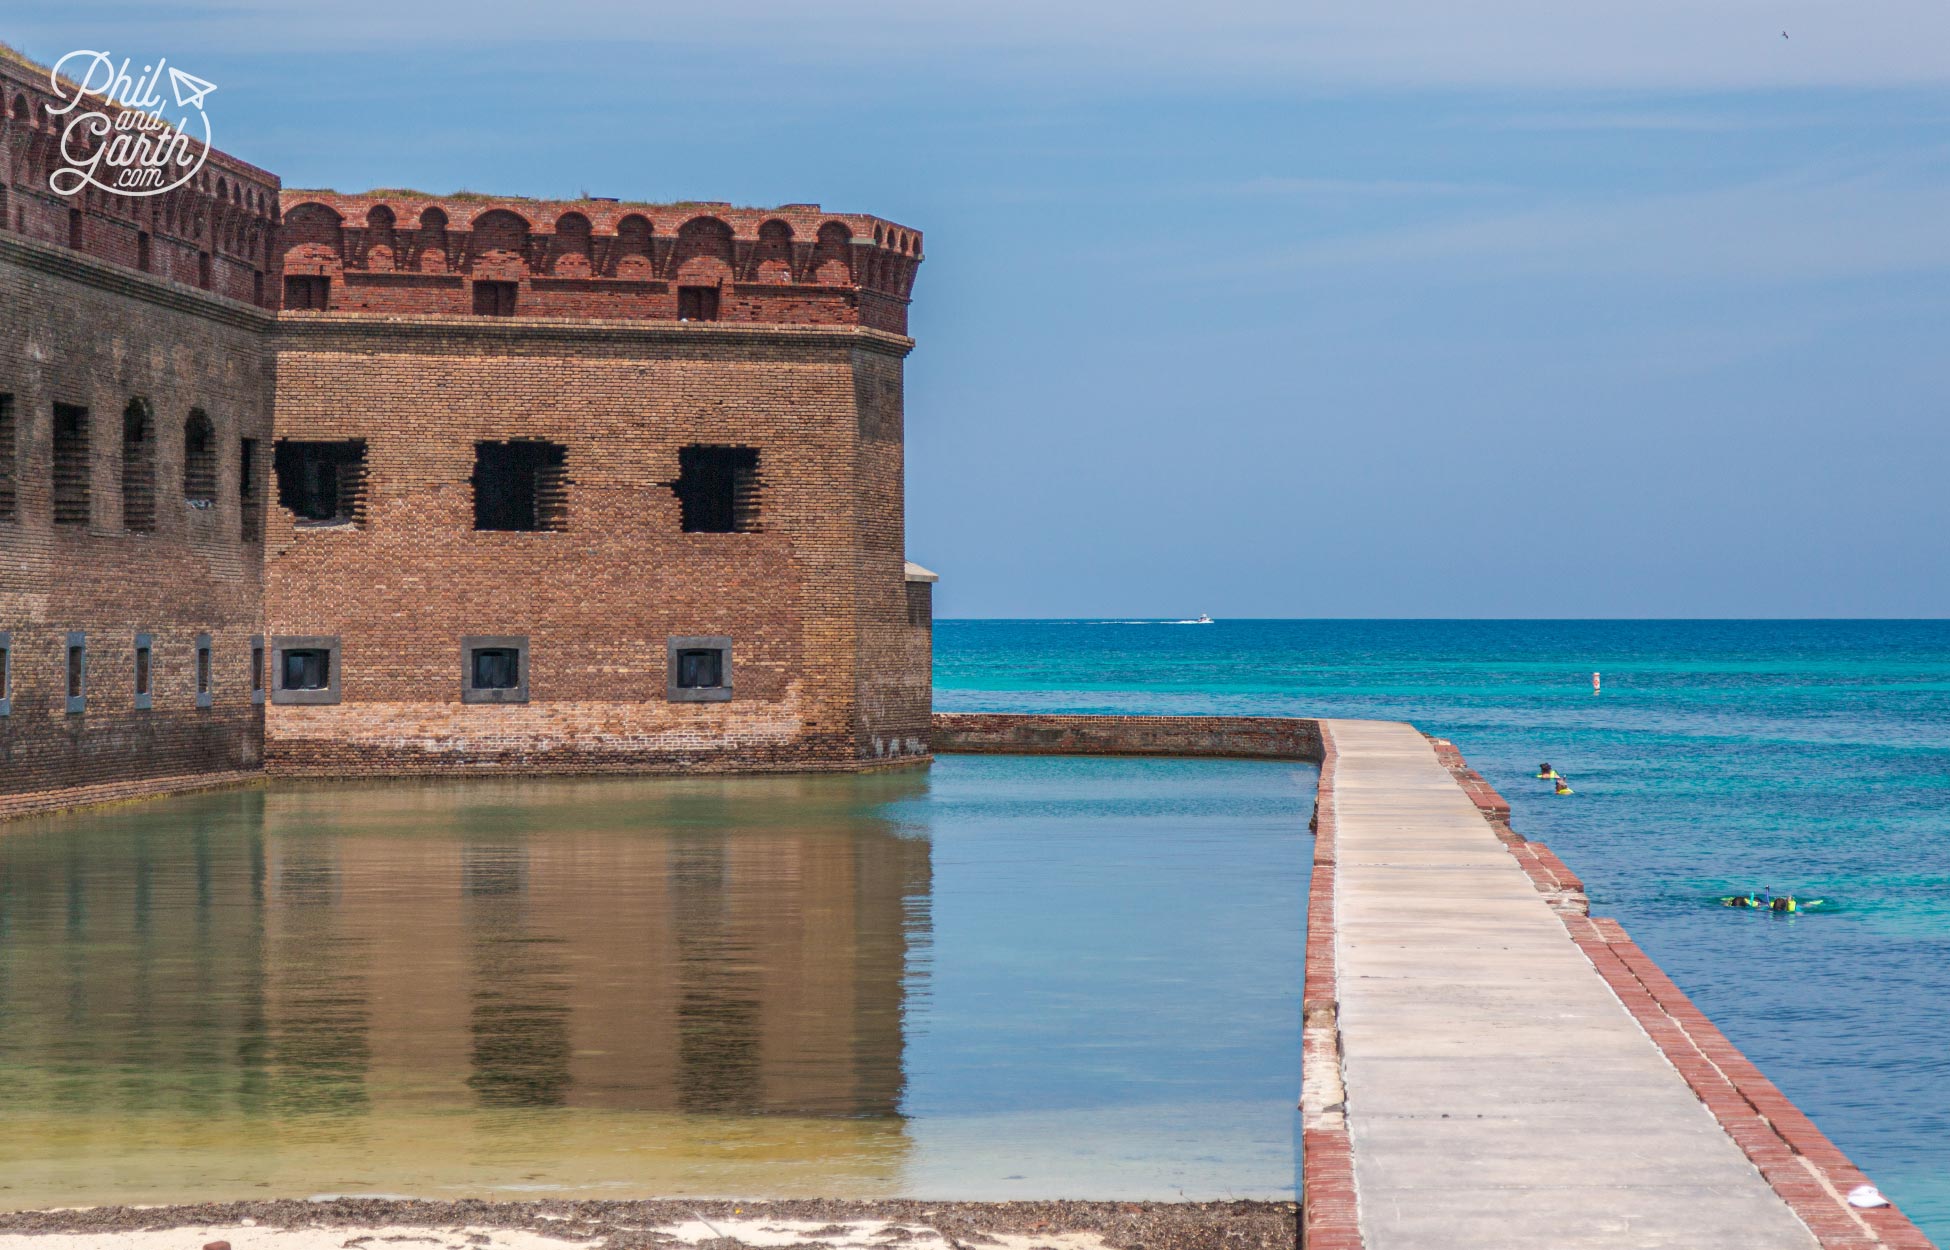 The seawall and moat surrounding Fort Jefferson